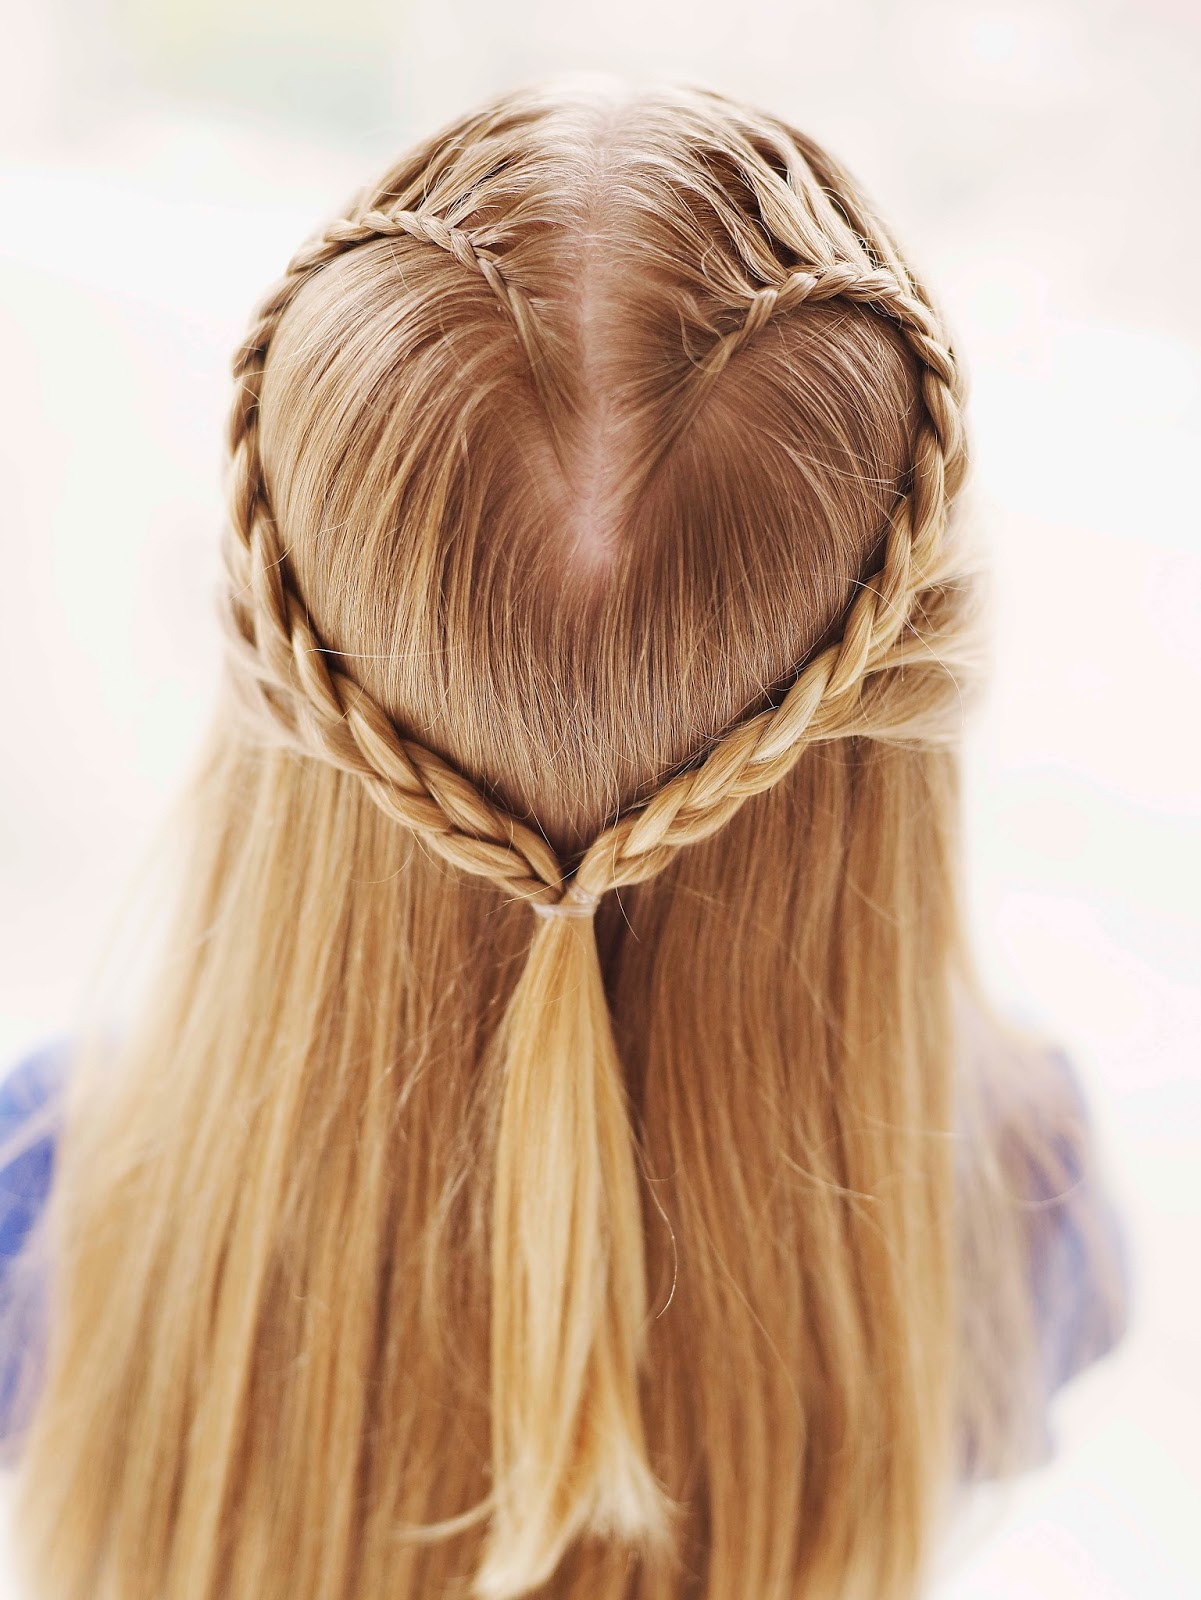 long hair tumblr hairstyles for long hair tumblr easy hairstyles for 